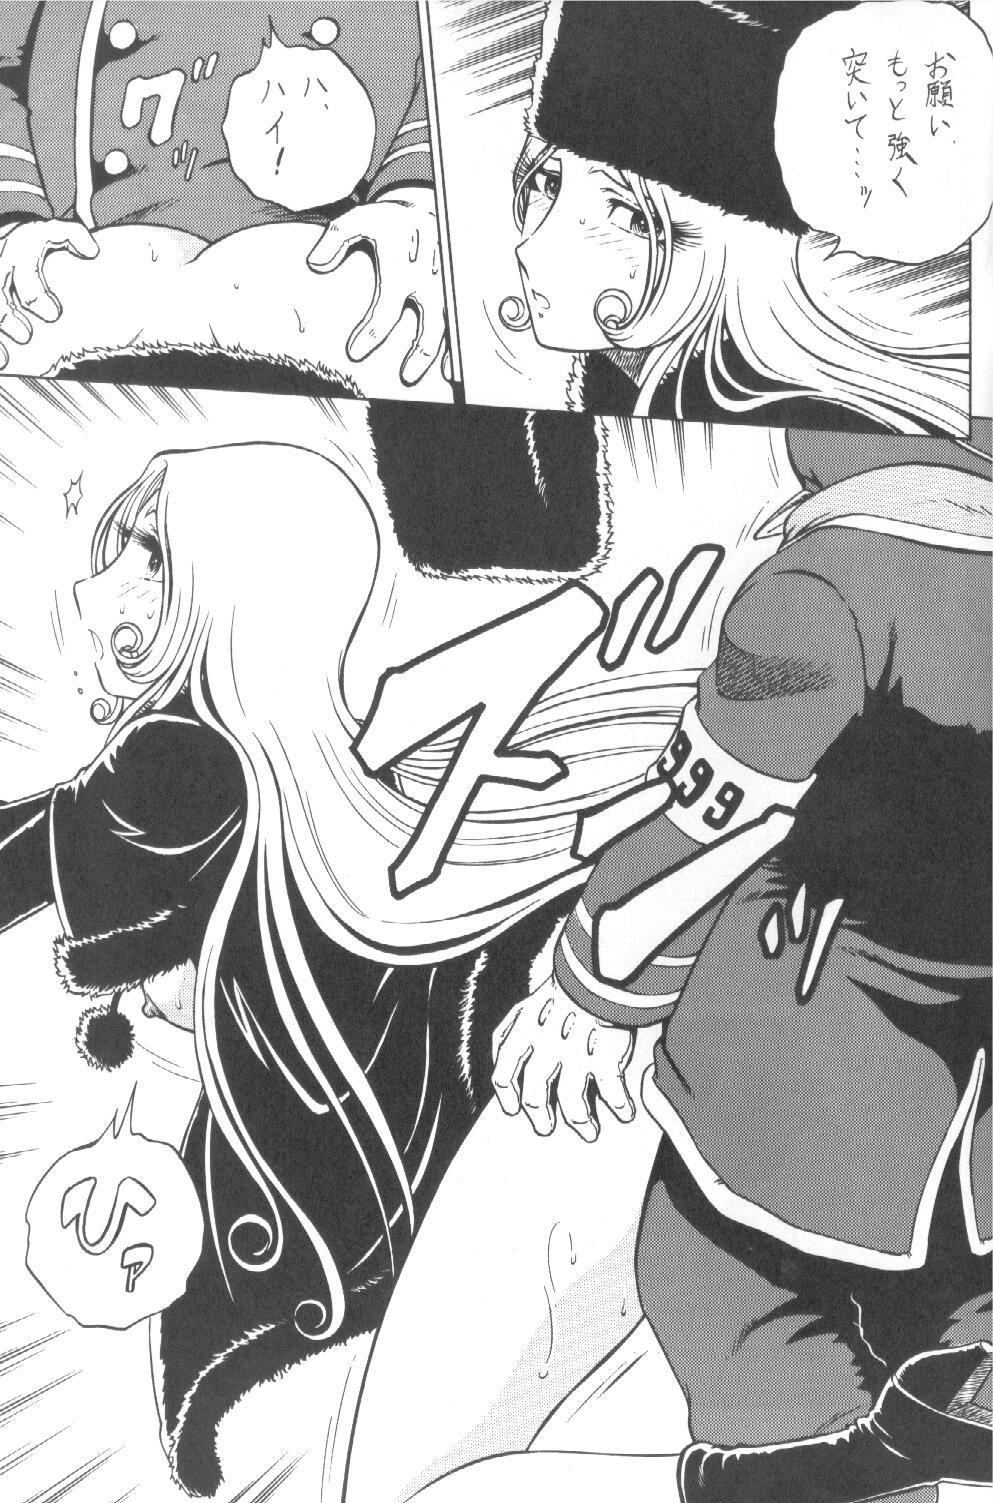 Flogging NIGHT HEAD 999 - Galaxy express 999 Double - Page 11